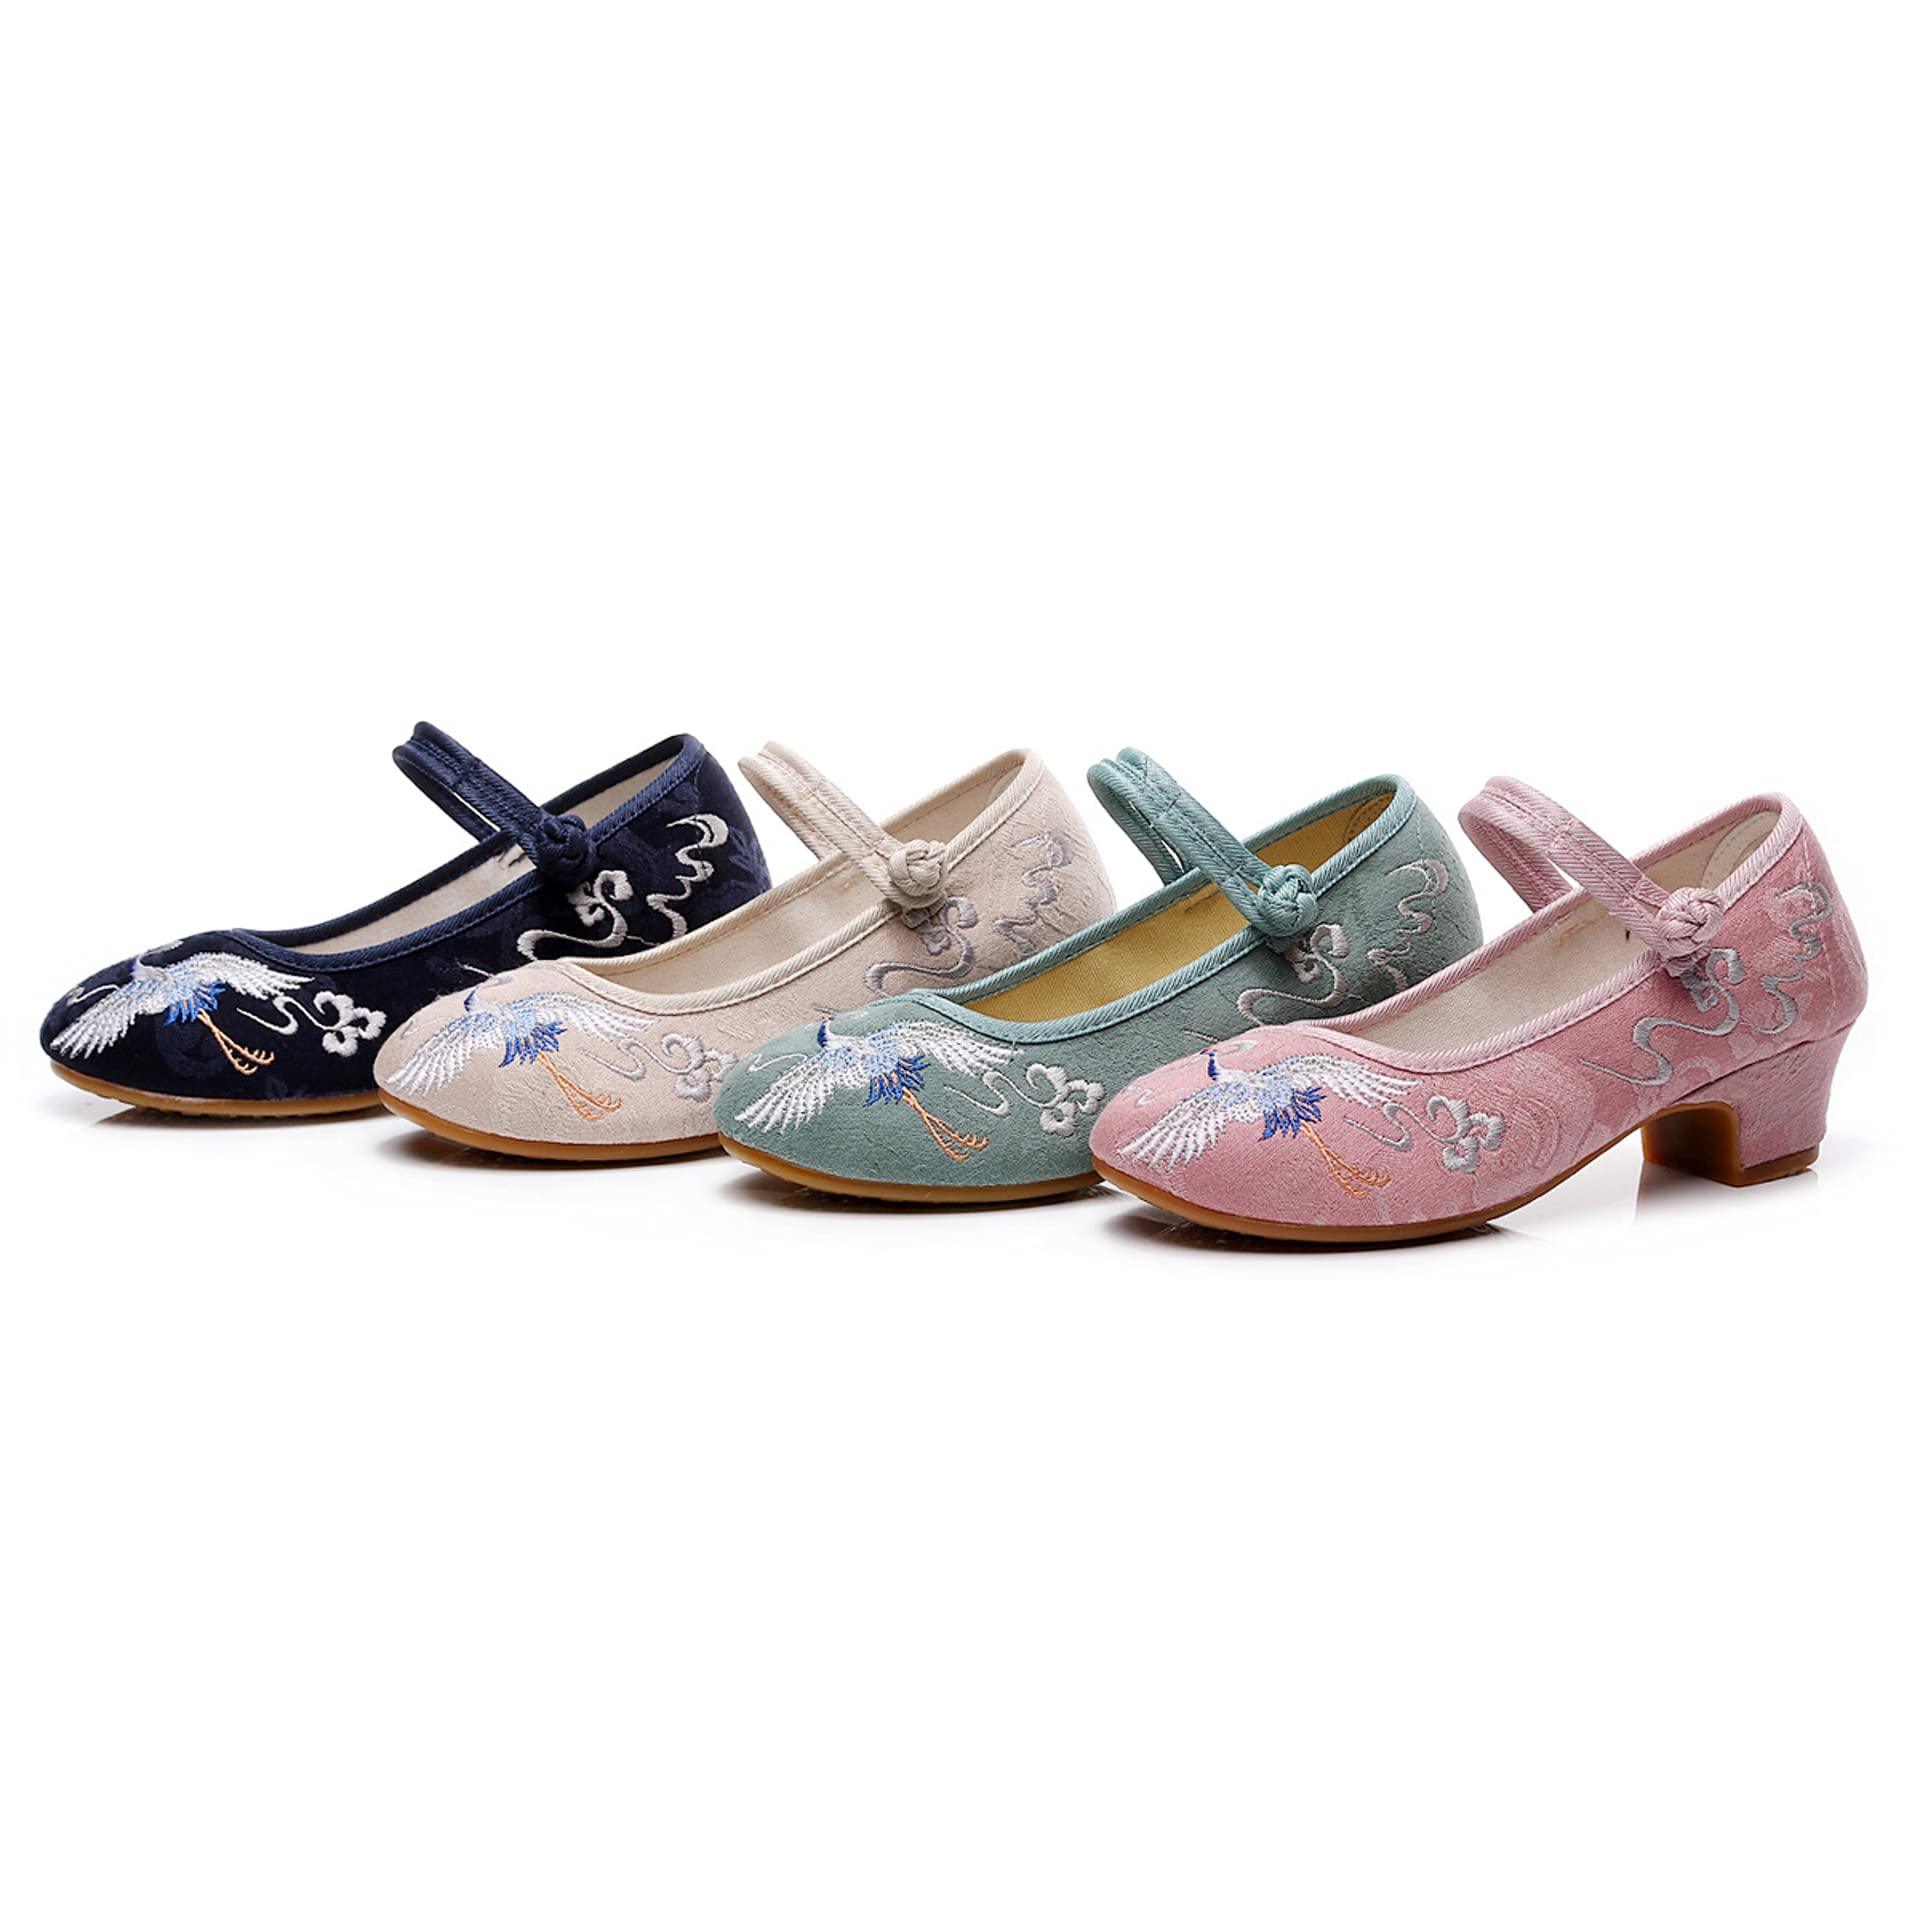 Henoo Women's Round Toe Low-Heel Shoes, Retro Chinese Style Ebroidered Shoes, Tendon-Soled Dance Cloth Shoes Beige